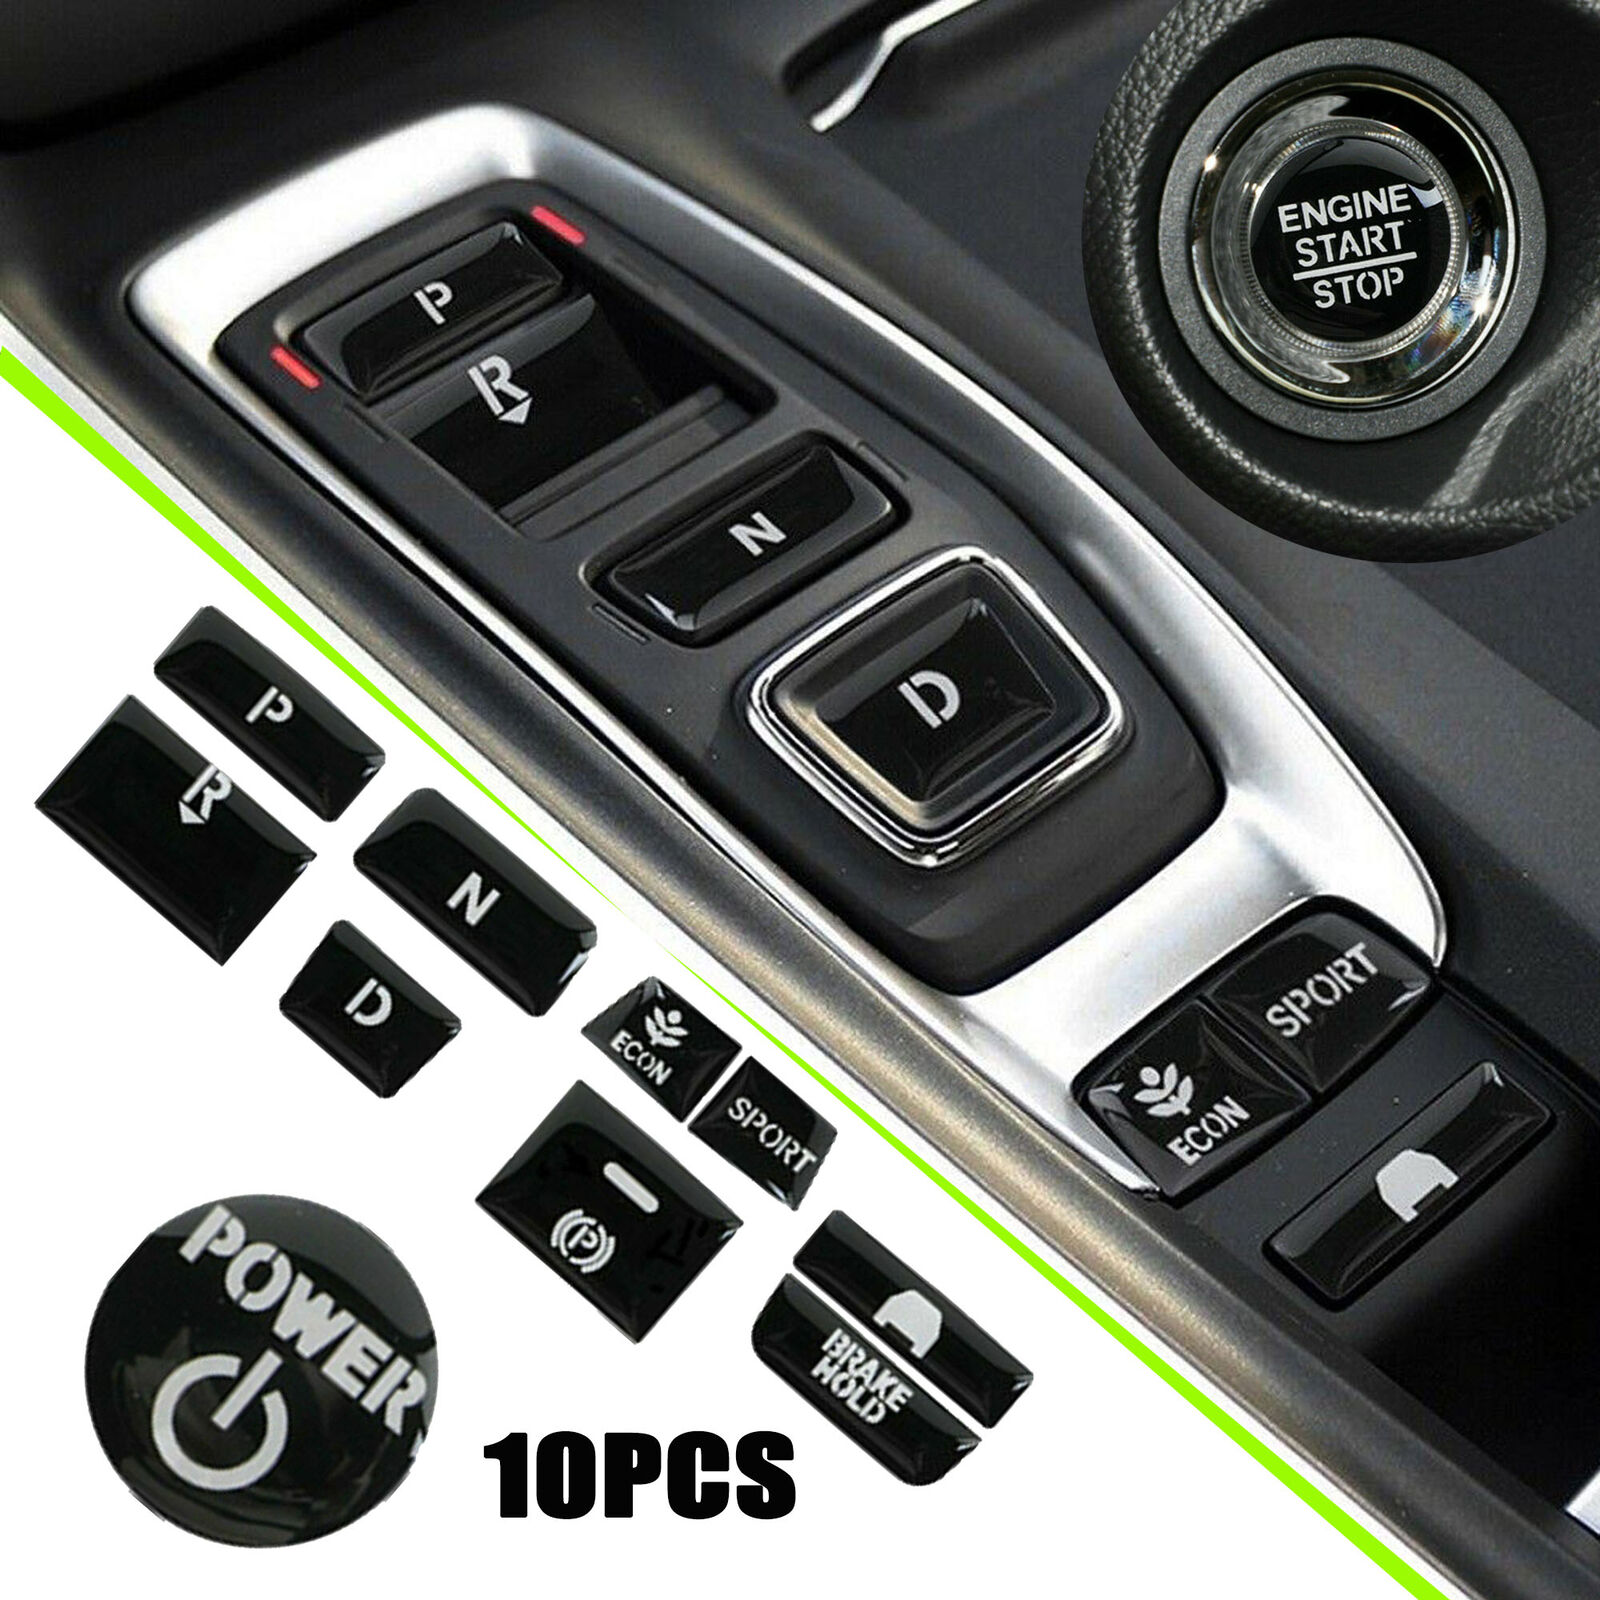 10pcs Black Gear Shift Switch Button Guard Cover Decal For Honda Accord 2018-21